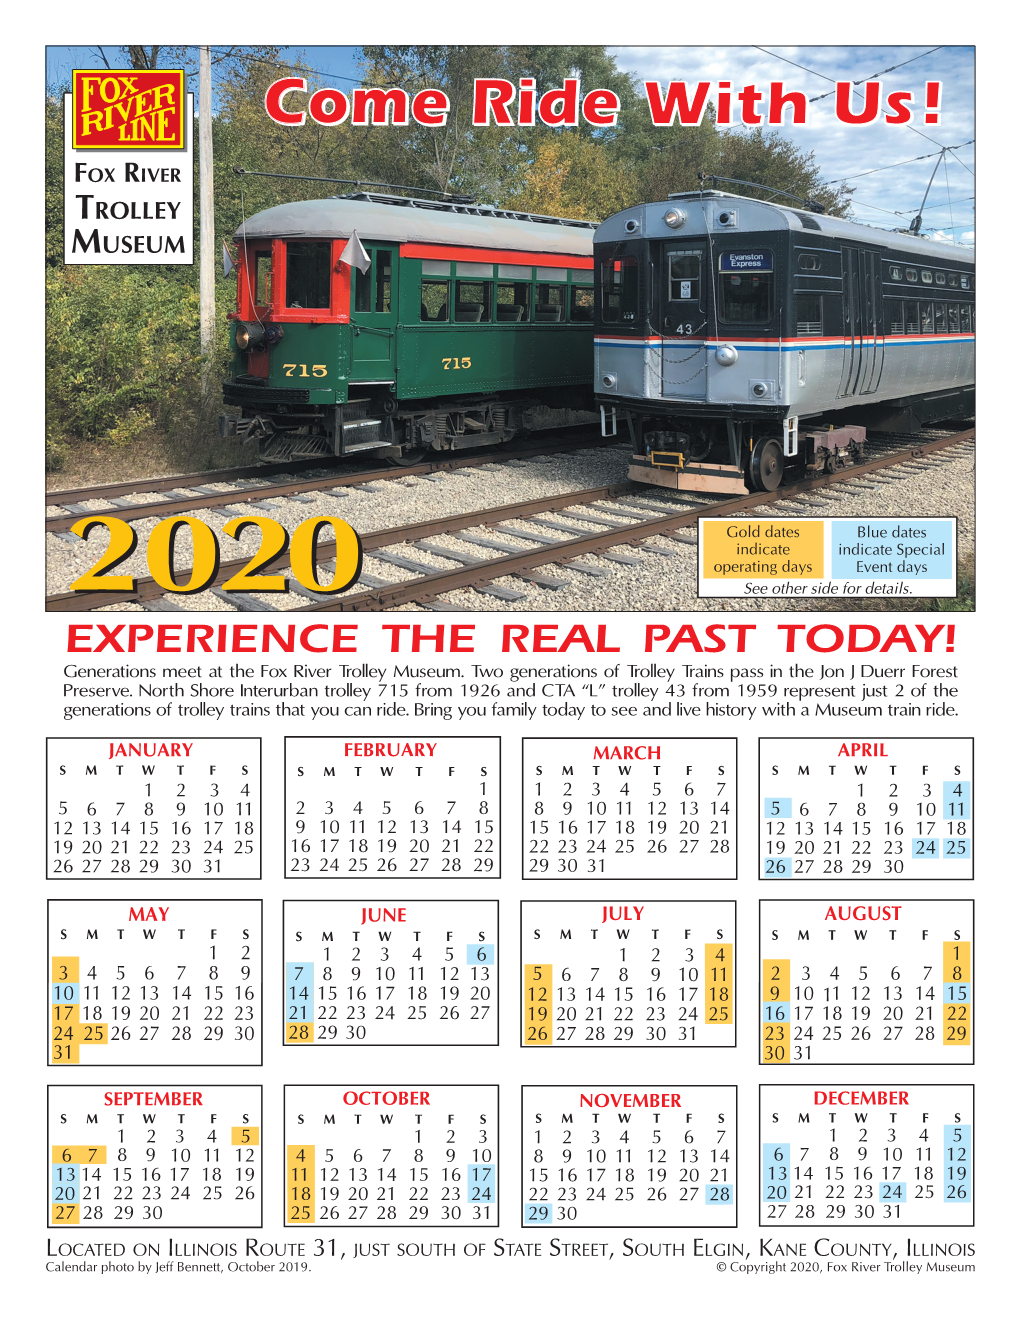 EXPERIENCE the REAL PAST TODAY! Generations Meet at the Fox River Trolley Museum